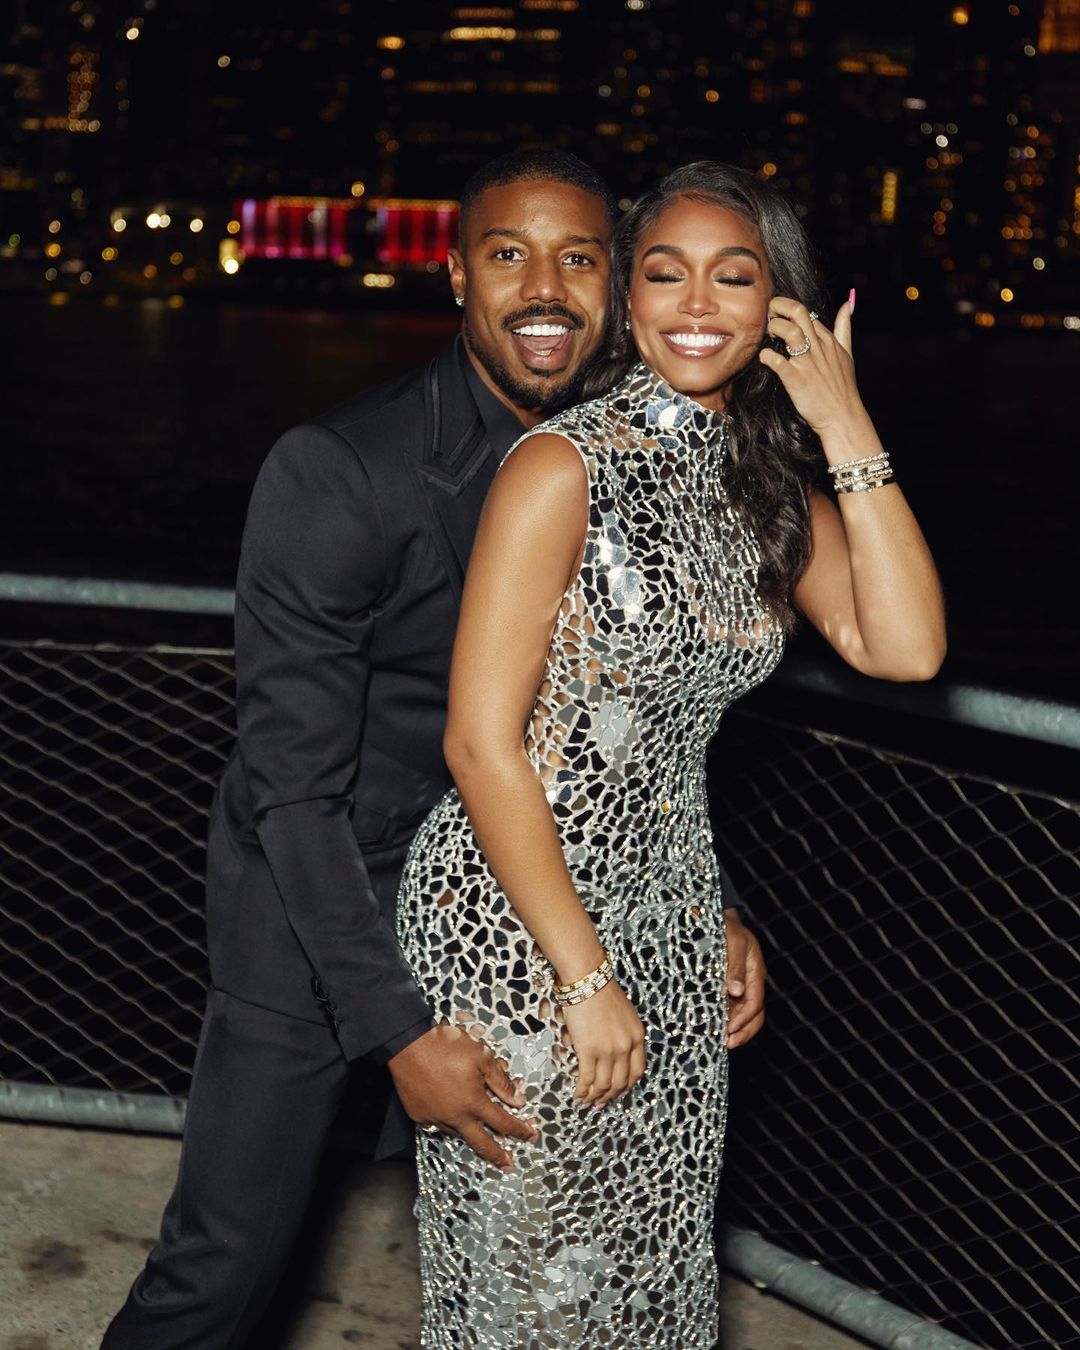 Steve Harvey Approves Of Michael B. Jordan and Lori Harvey’s Love: ‘He Is One Of The Nicest Guys’